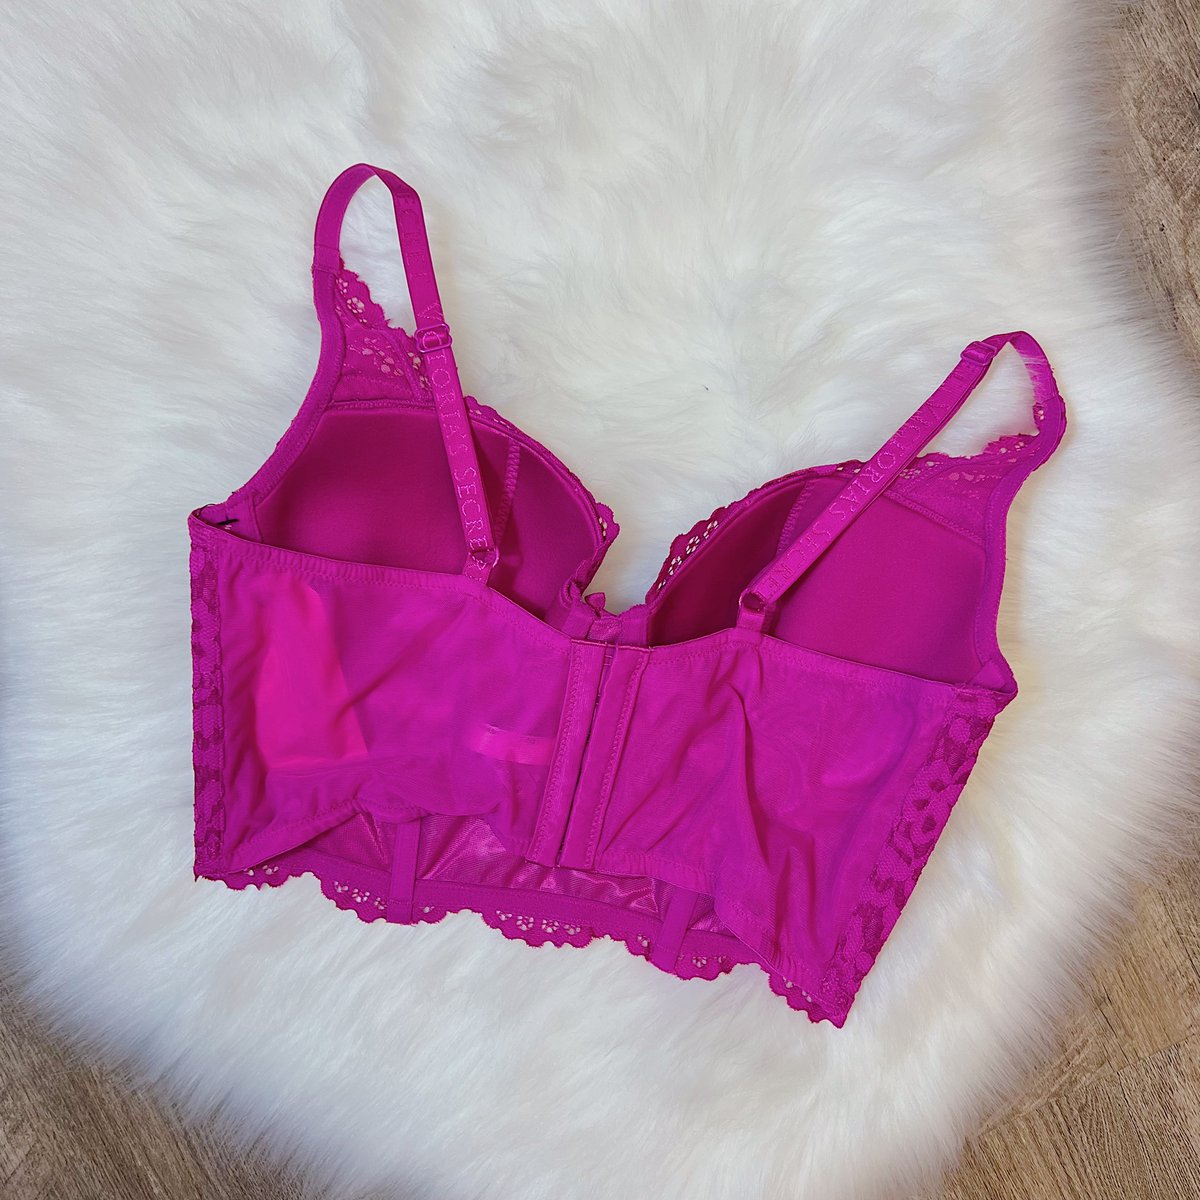 bn victoria's secrets body unlined demi all over lace pink bra size 36c,  Women's Fashion, New Undergarments & Loungewear on Carousell